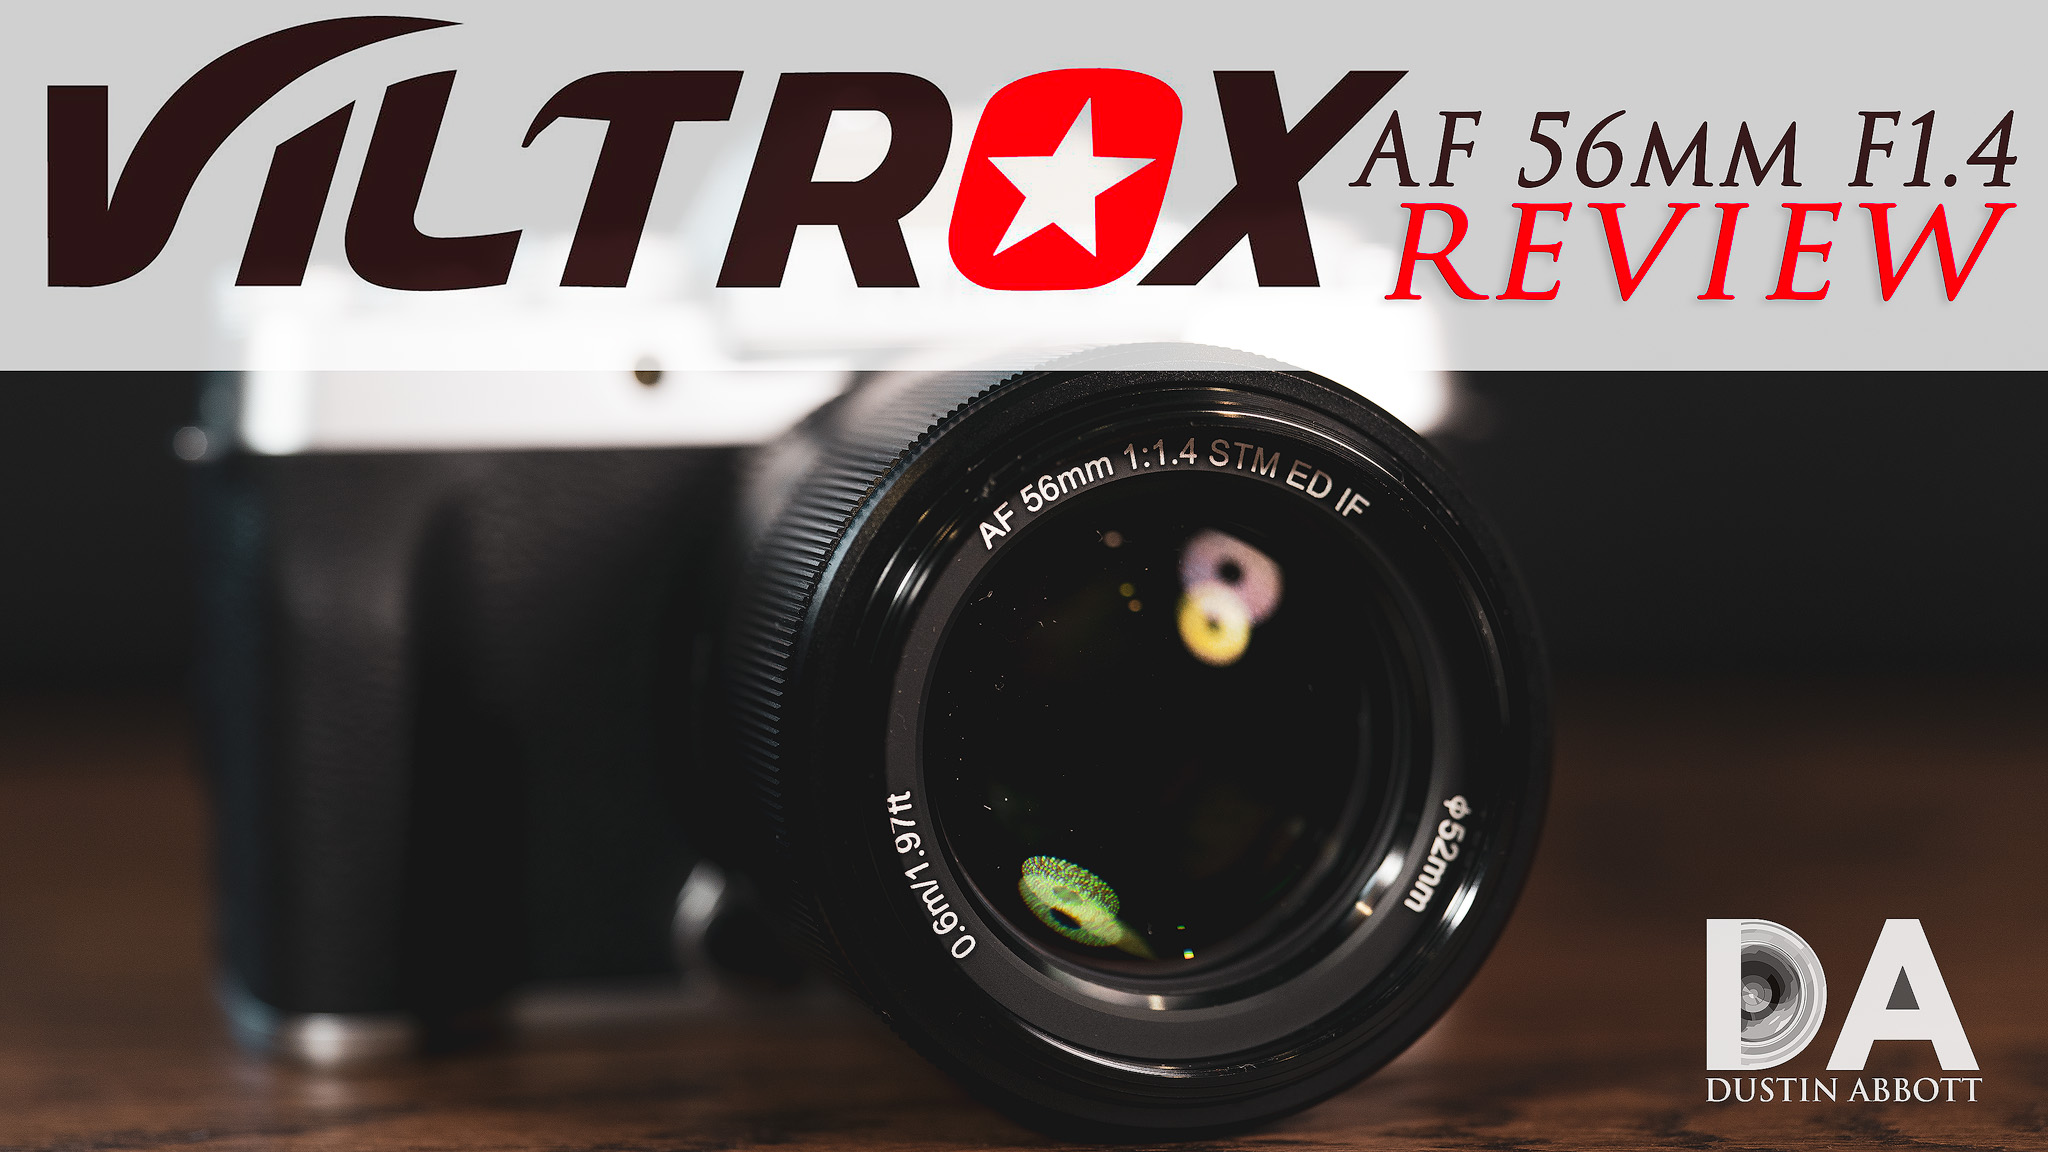 Viltrox AF 56mm F1.4 Review and Image Gallery - DustinAbbott.net